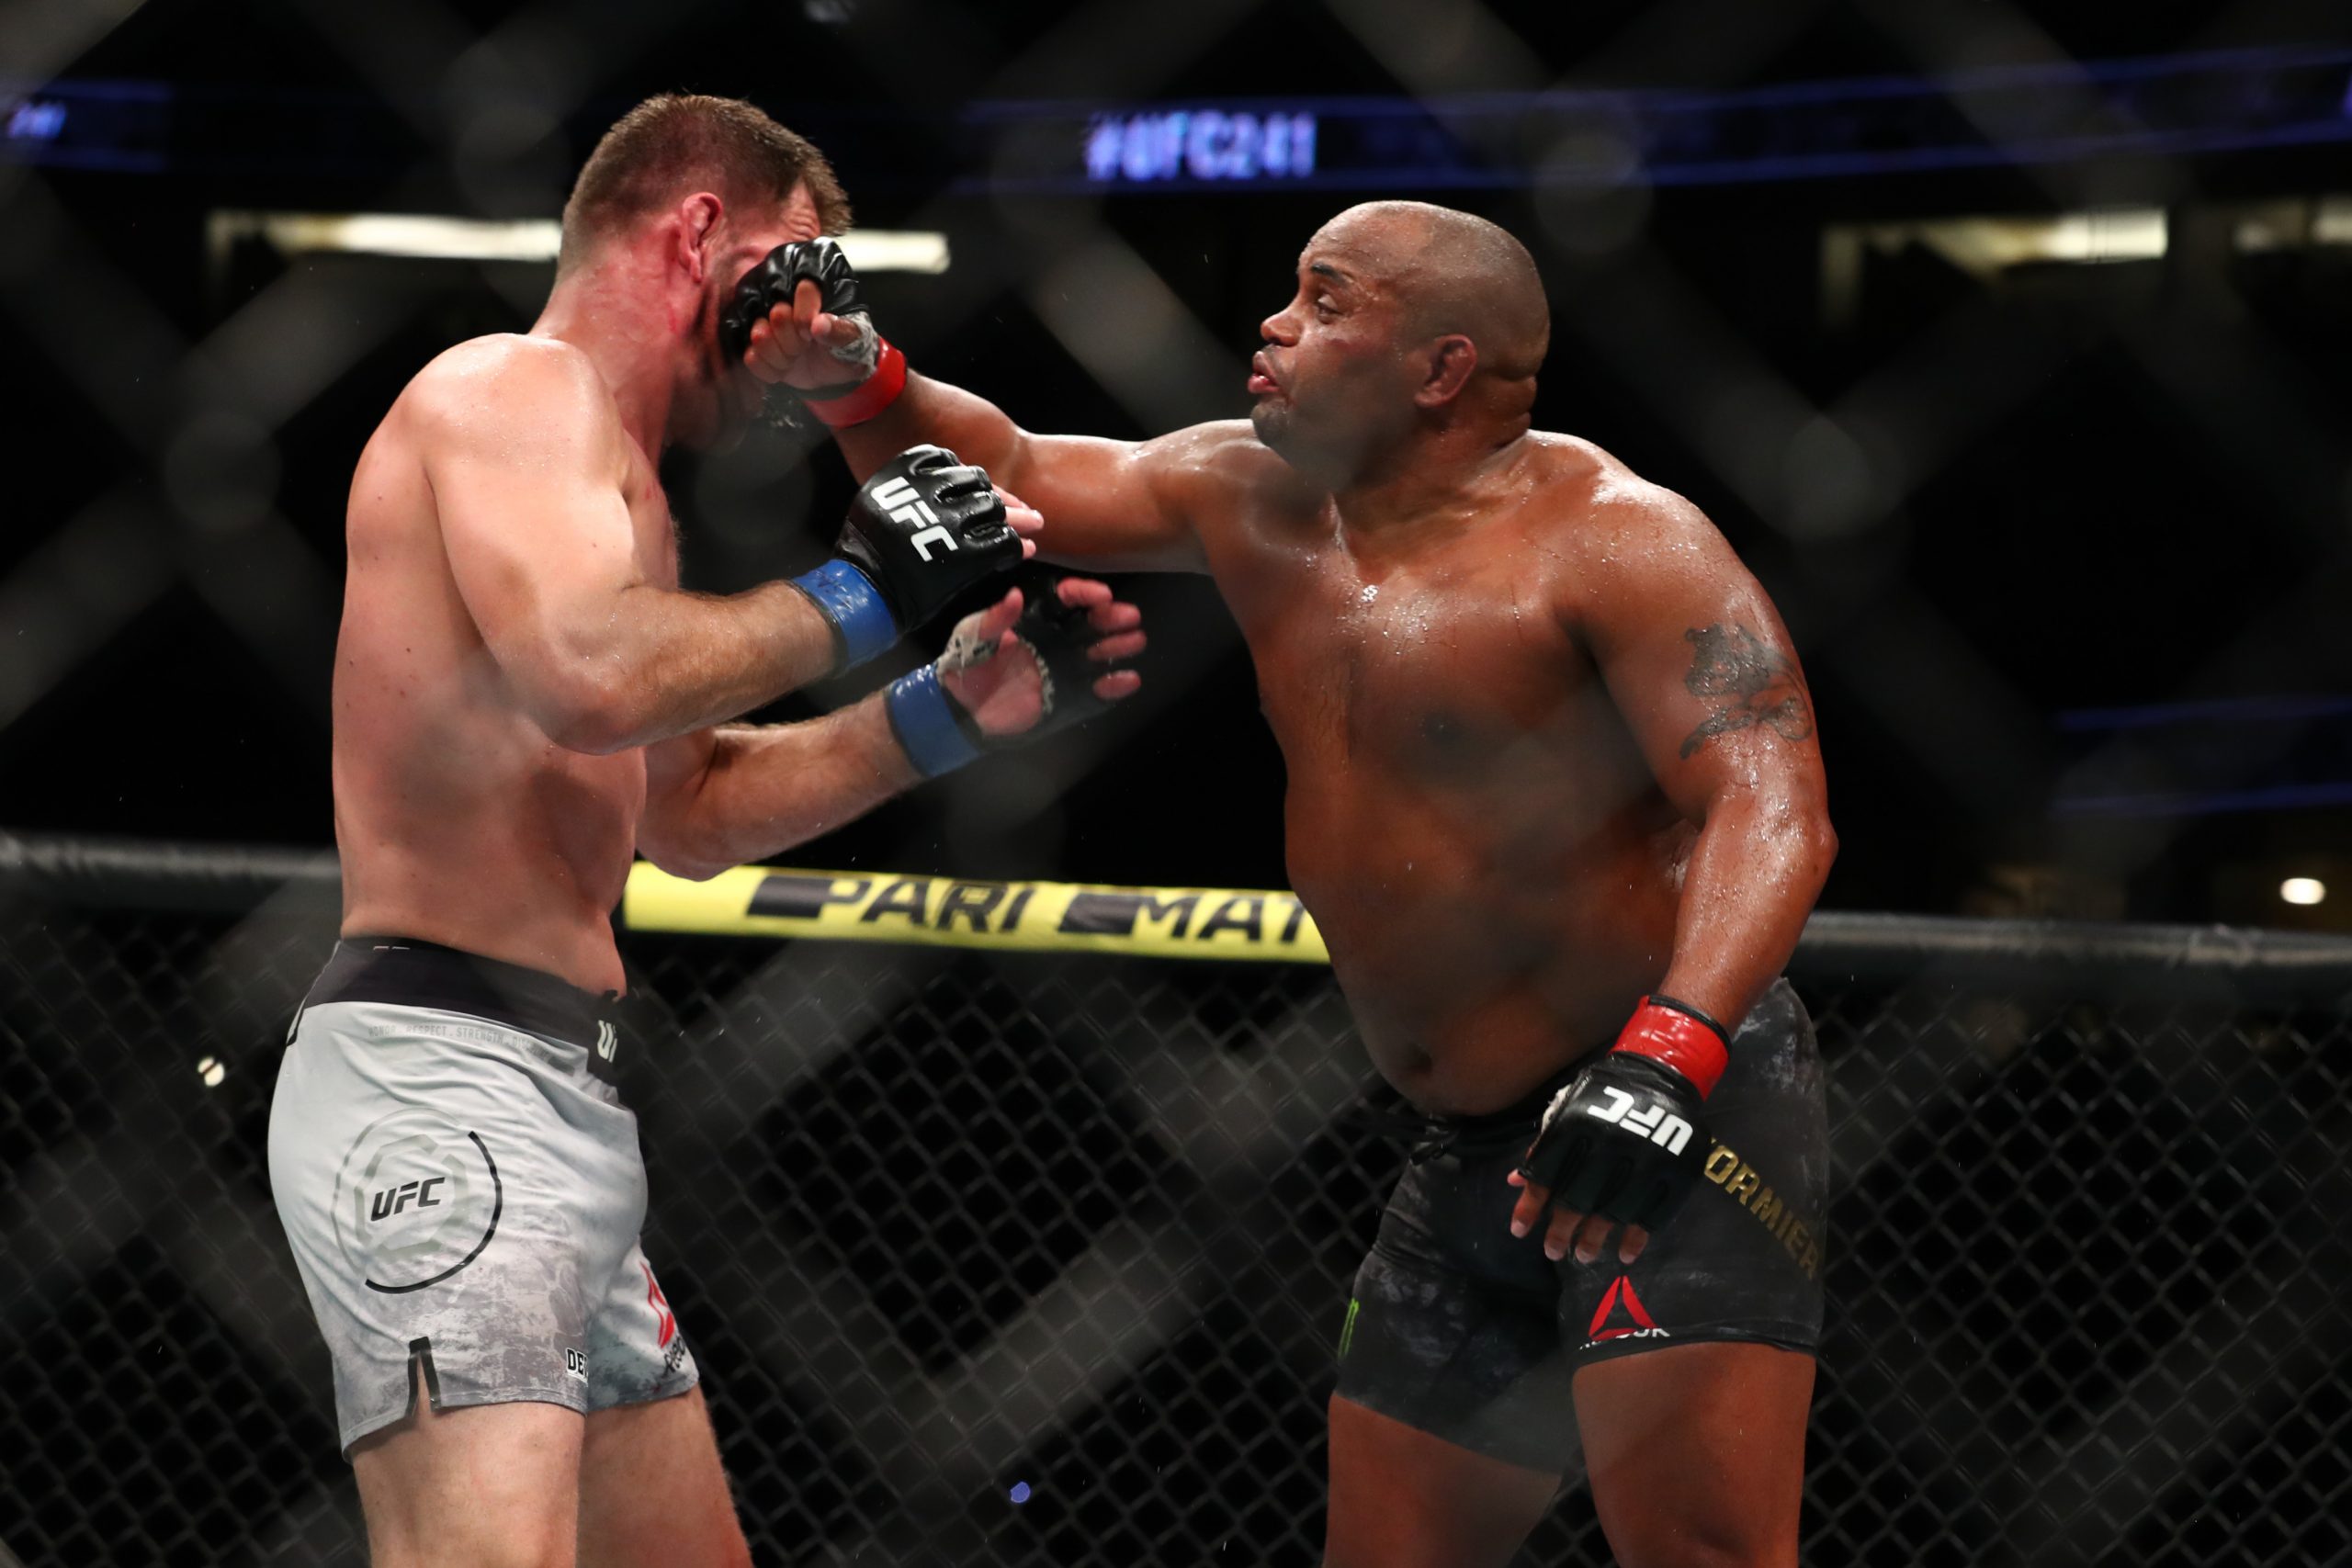 Daniel Cormier vs Stipe Miocic 3 will take place at UFC 252